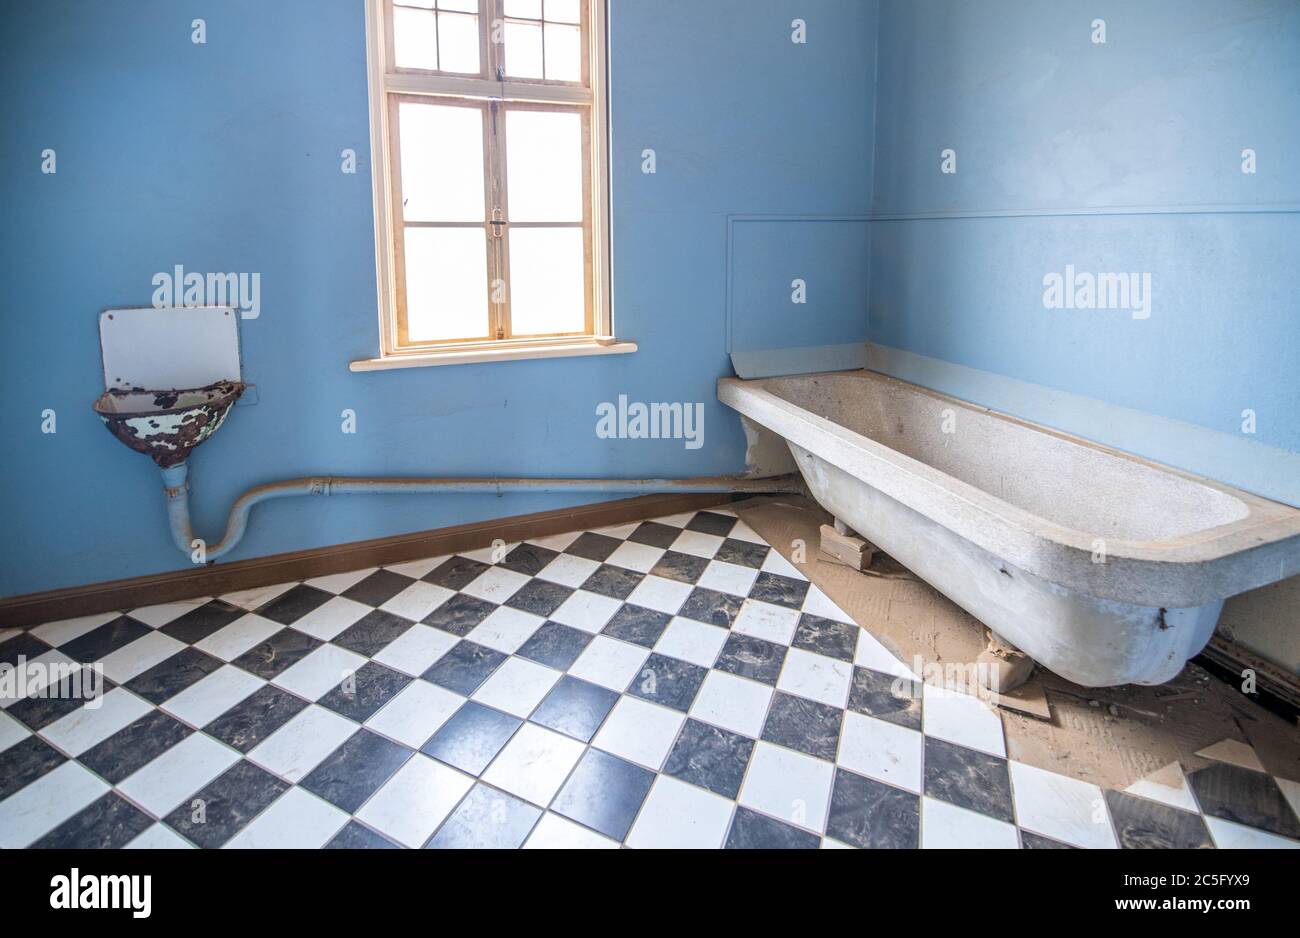 The interior of a building in the ghost town of Kolmanskop , Karas Region, Namibia Stock Photo